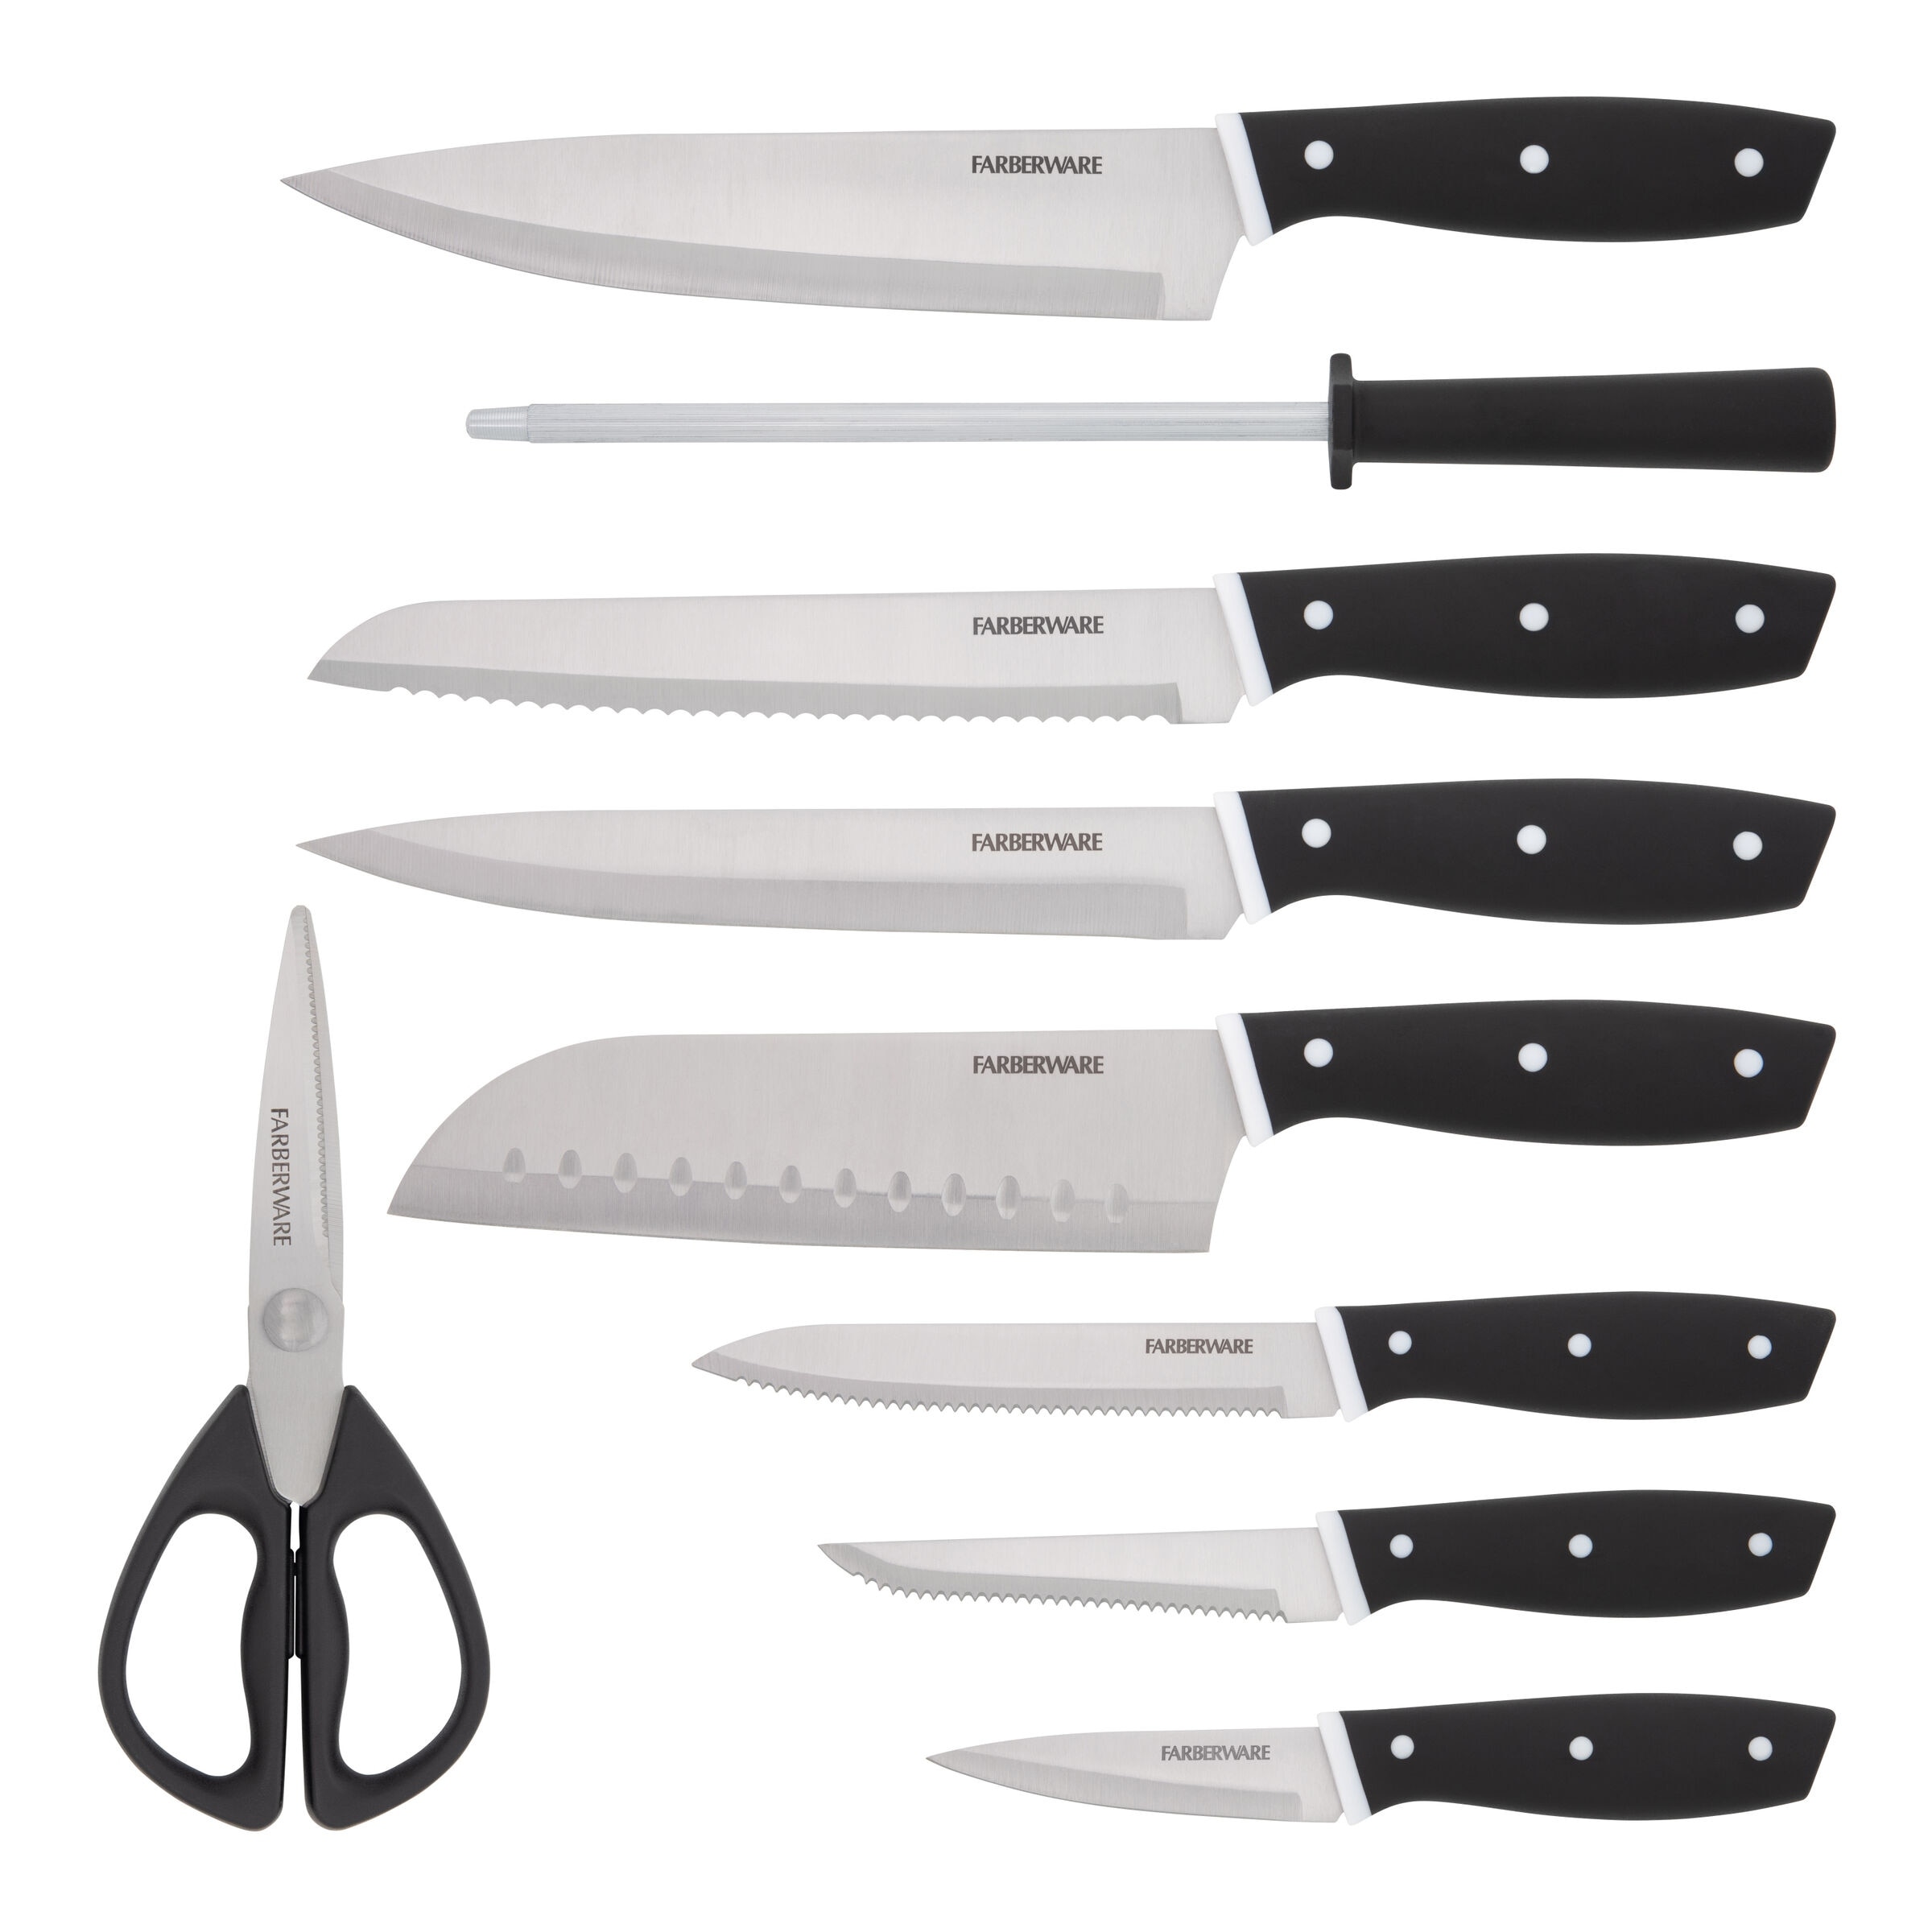 https://ak1.ostkcdn.com/images/products/is/images/direct/5d75730ec82eb8b204eae86ee39117cc2f04ea8b/Farberware-15-Piece-Cutlery-Set-with-Natural-Block.jpg